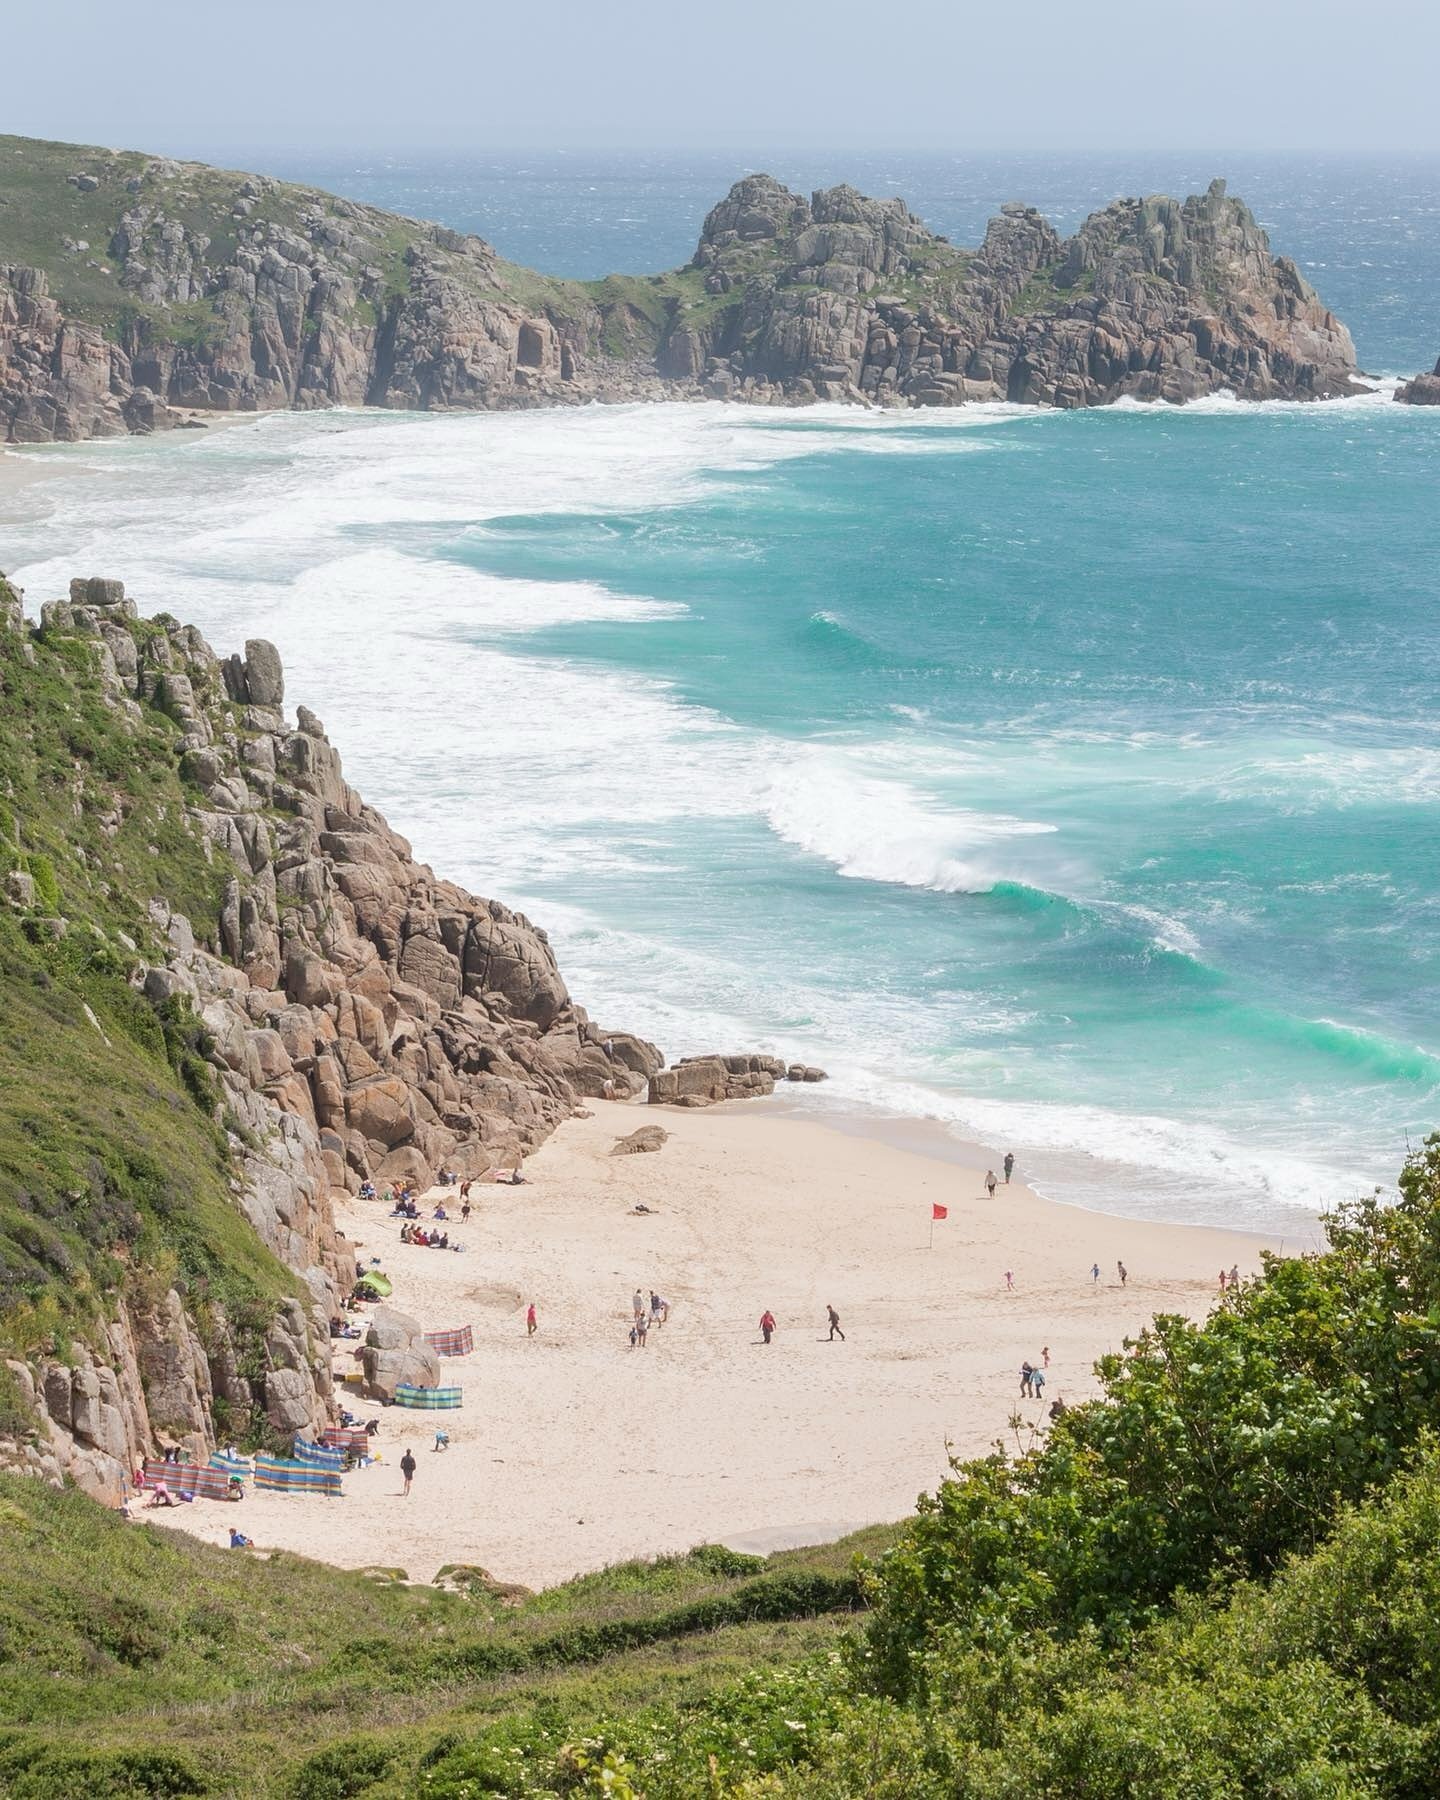 One of my favourite beaches, beautiful Porthcurno